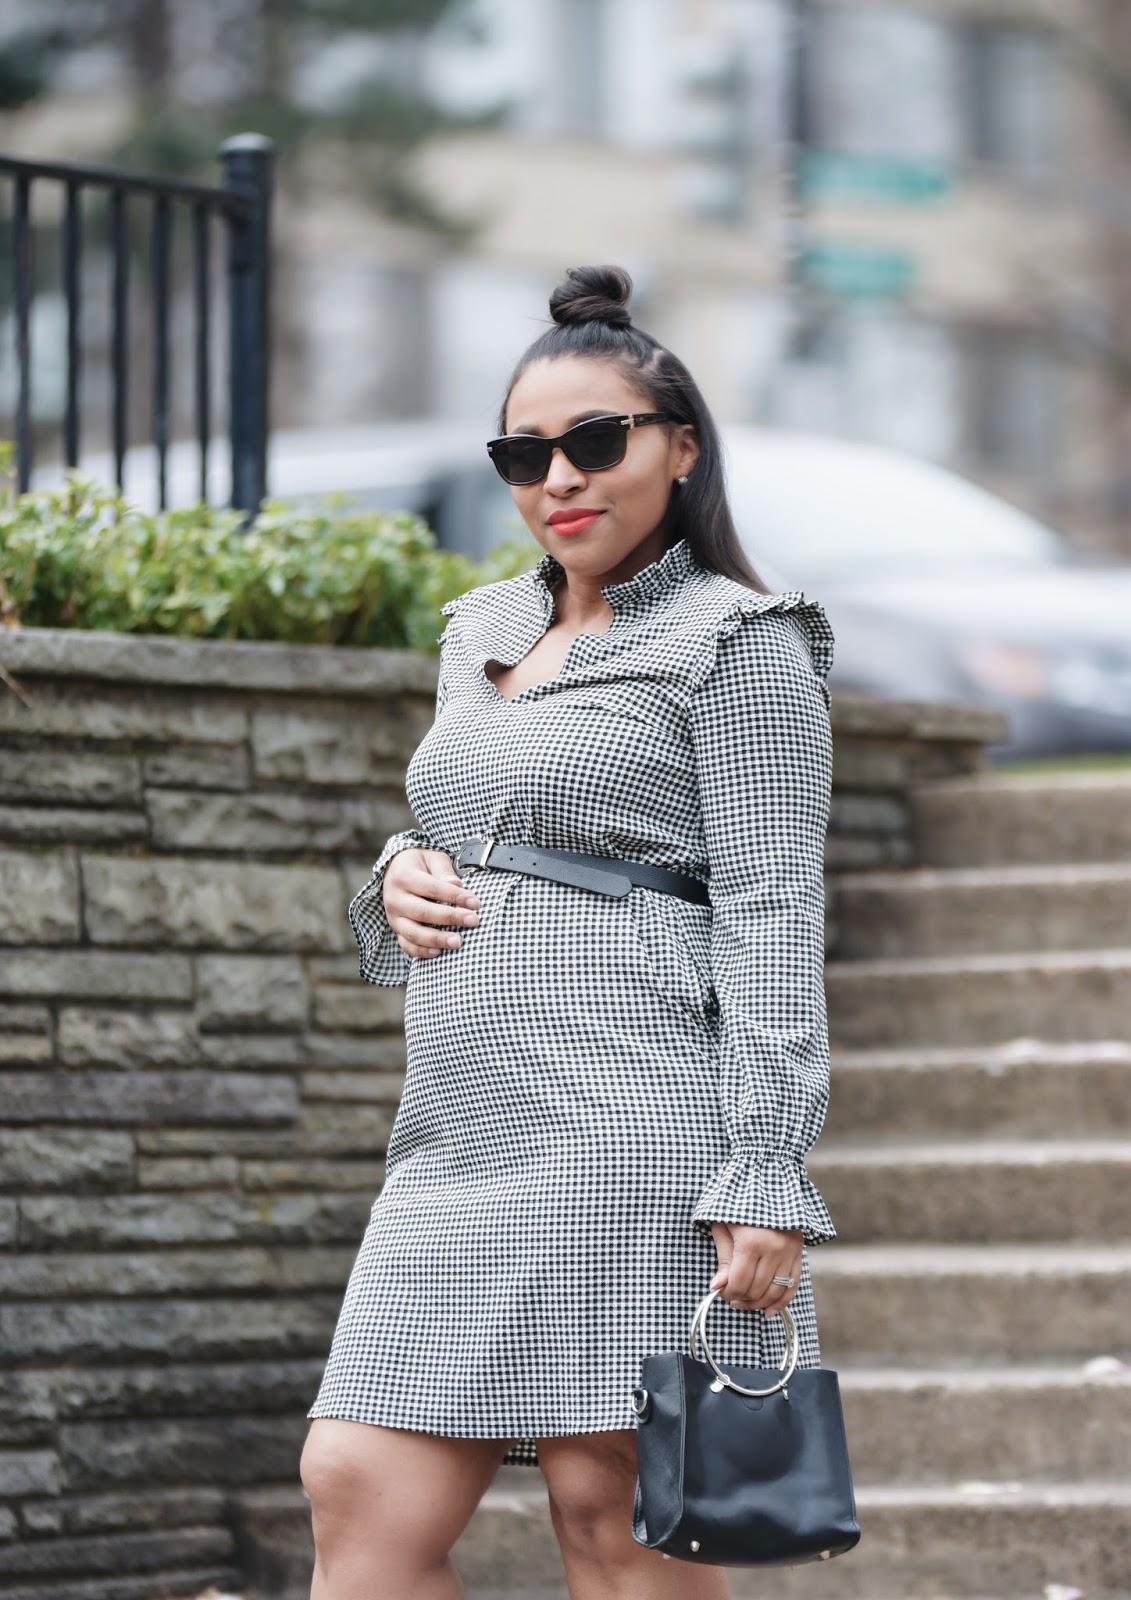 maternity fashion, spring looks, h&m dresses, pregnancy style, maternity, mom bloggers